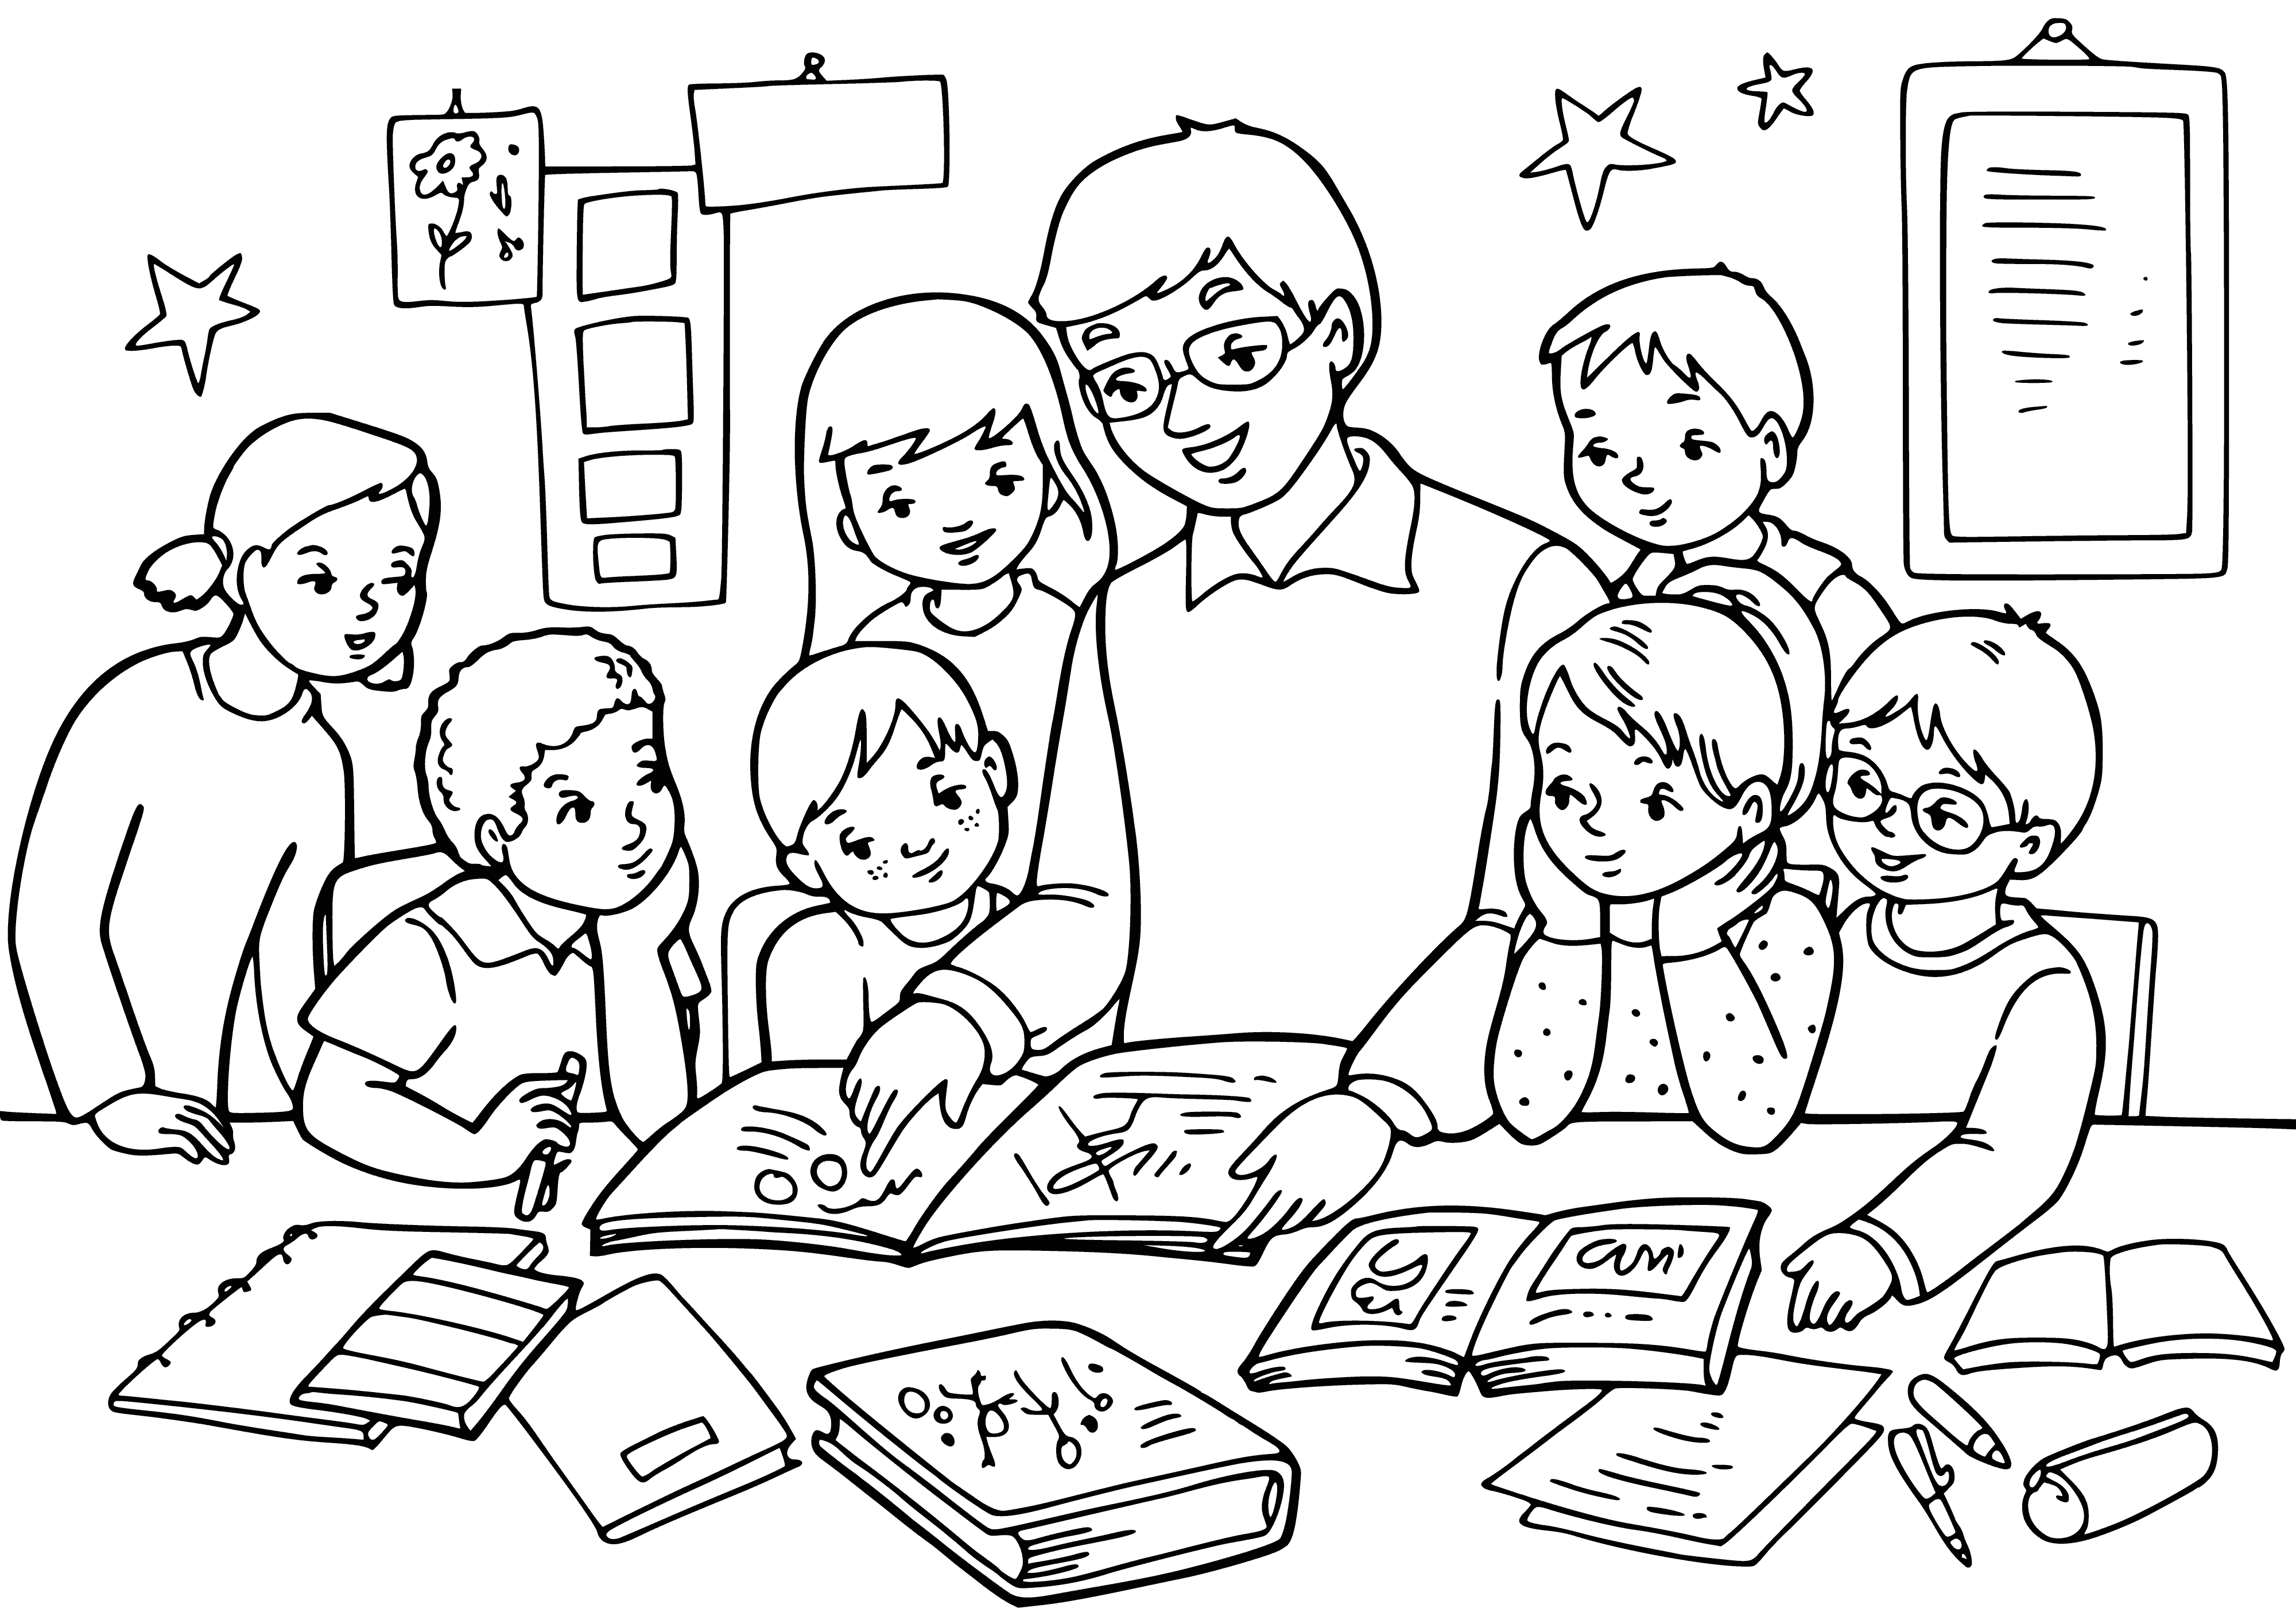 coloring page: Teacher standing in front of attentive students, pointing to book and reminding them "1 Sept is day of knowledge."